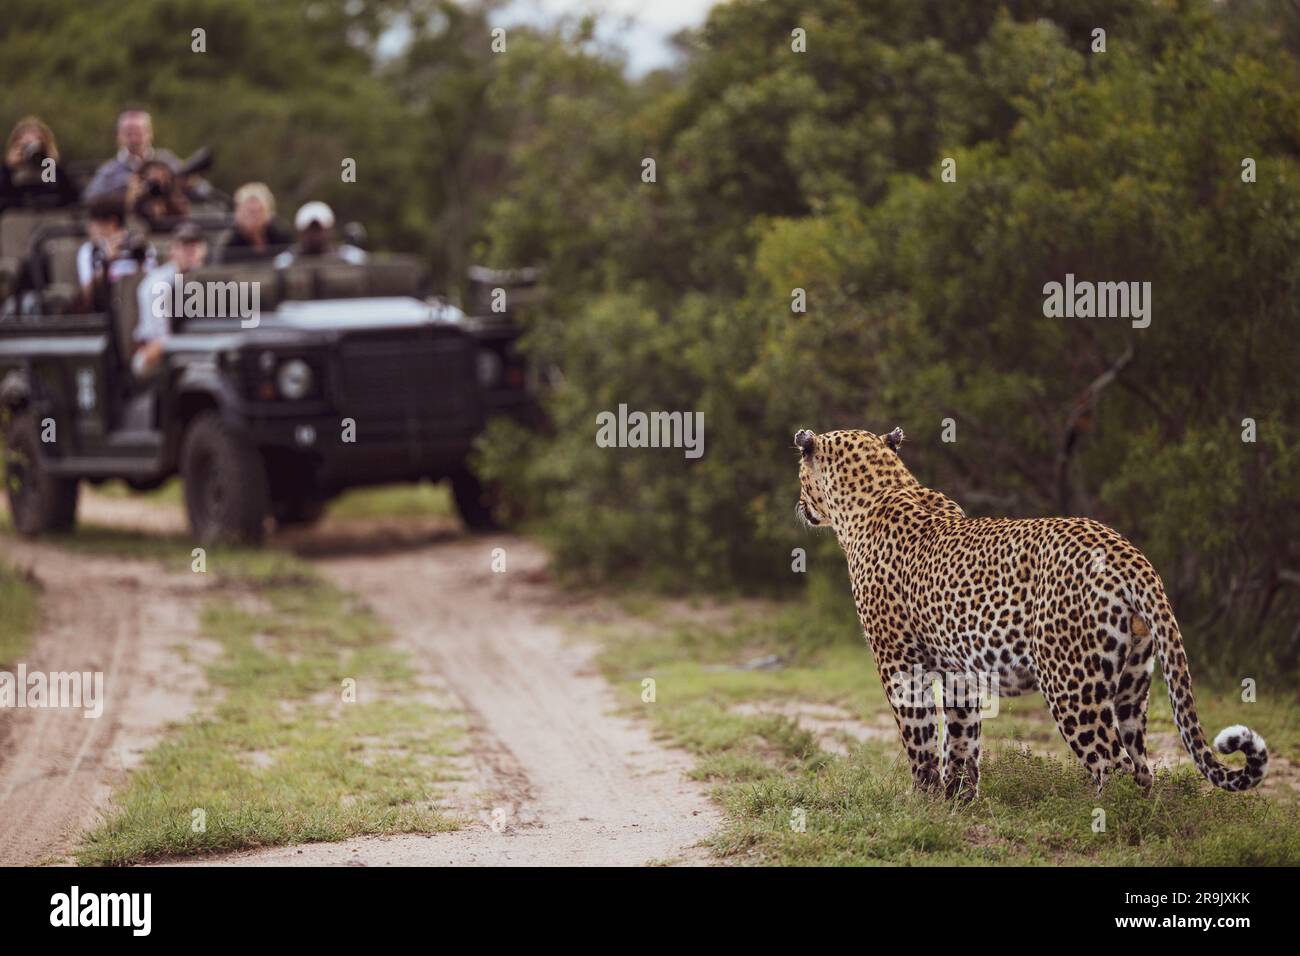 A male leopard, Panthera pardus, standing in front of a safari vehicle. Stock Photo